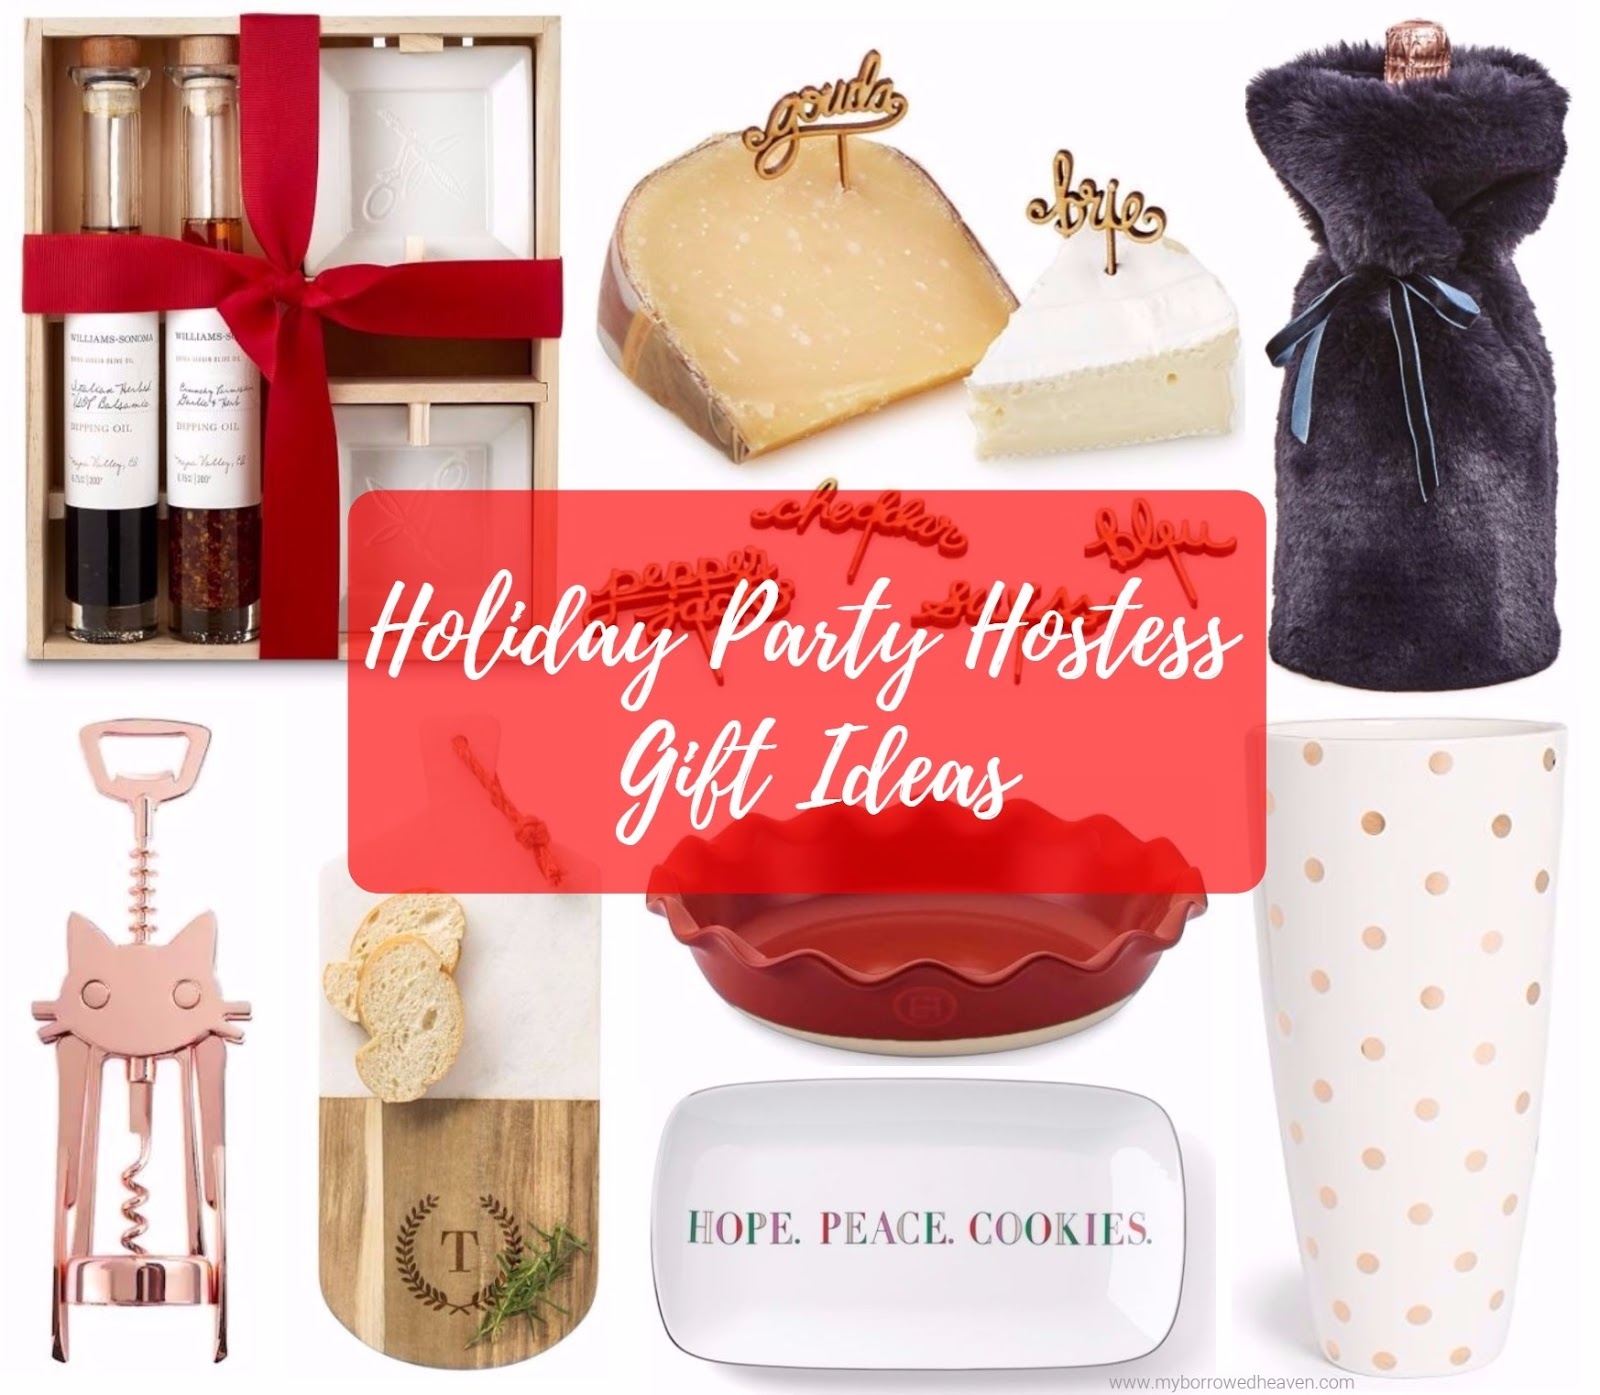 borrowed heaven: Holiday Gift Guide: Stocking Stuffers